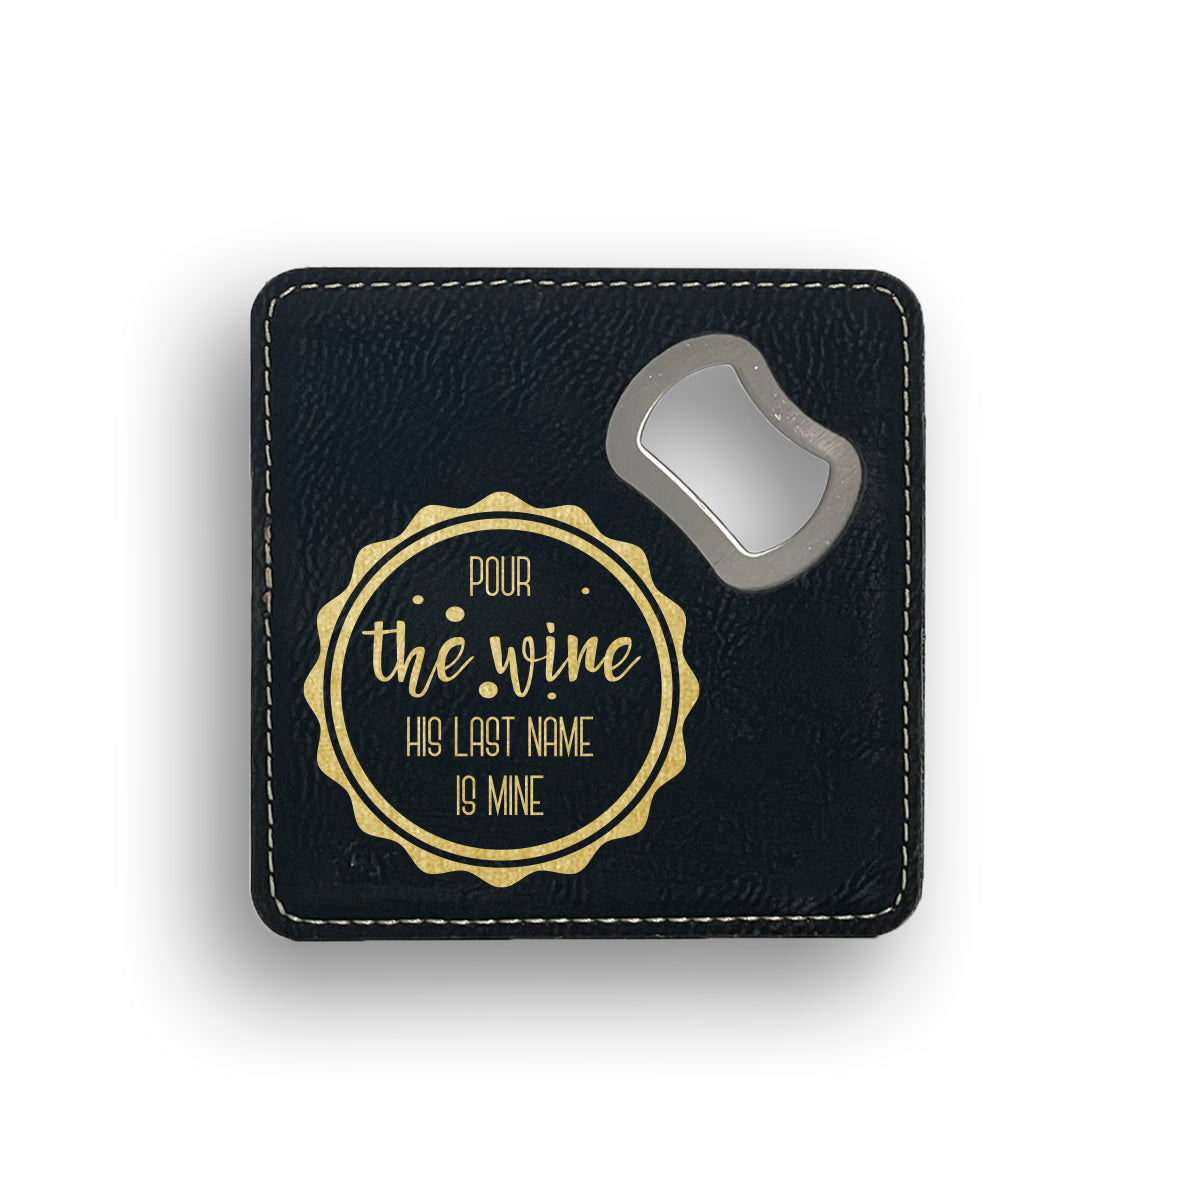 Pour The Wine His Last Name Is Mine Bottle Opener Coaster